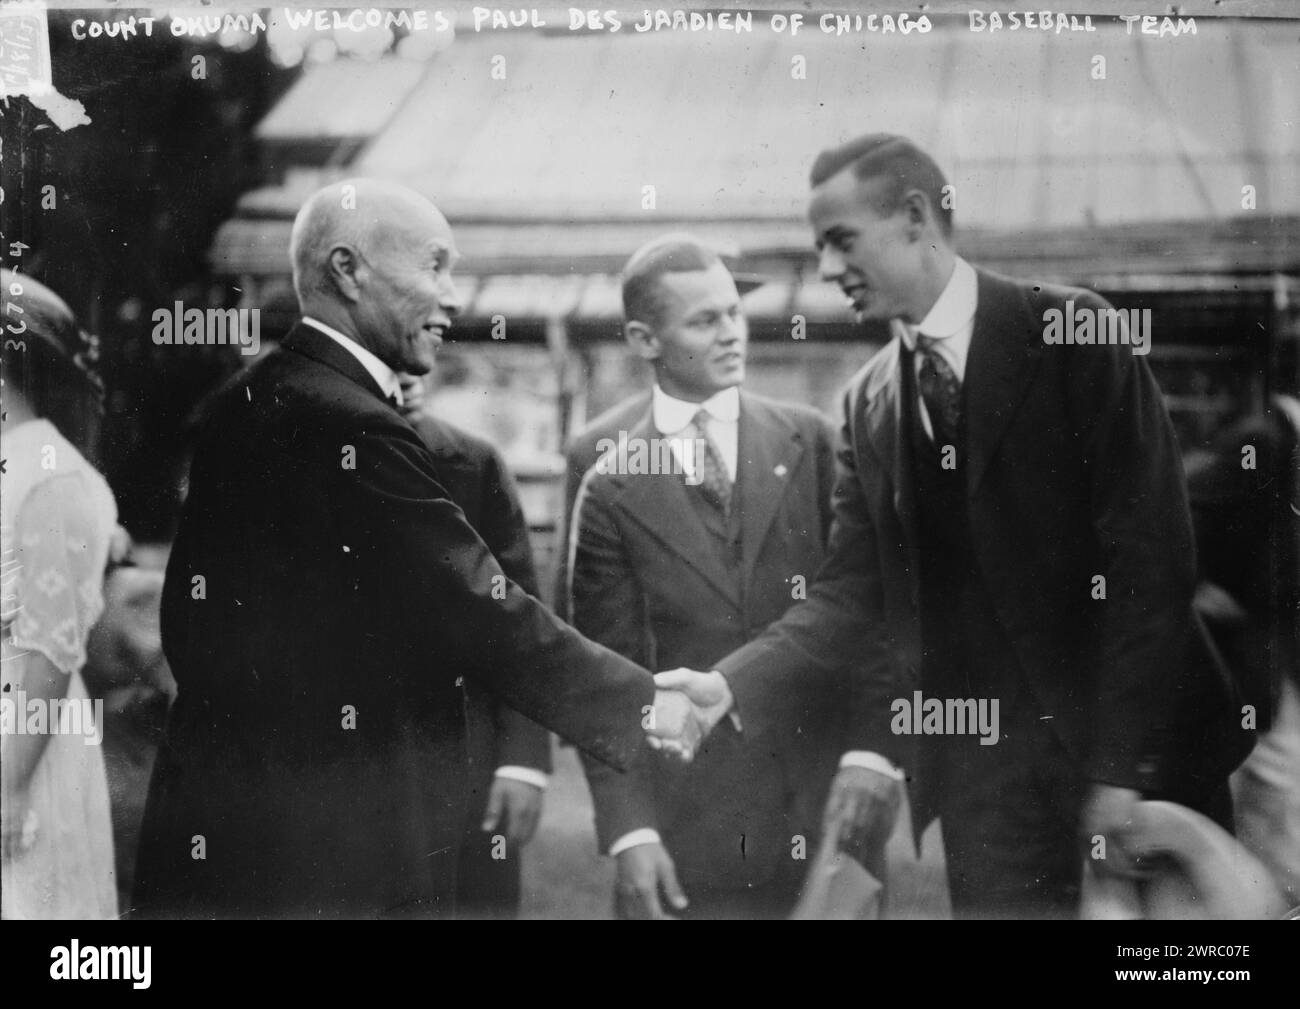 Count Okuma welcomes Paul Des Jardien of Chicago baseball team, 11/18/15, Photograph shows Marquess Okuma Shigenobu (1838-1922), Prime Minister of Japan, shaking hands with Paul Raymond 'Shorty' Des Jardien (1893-1956), an American football, baseball and basketball player who traveled with the University of Chicago to Japan in 1915., 1915 Nov. 18, Baseball, Glass negatives, 1 negative: glass Stock Photo